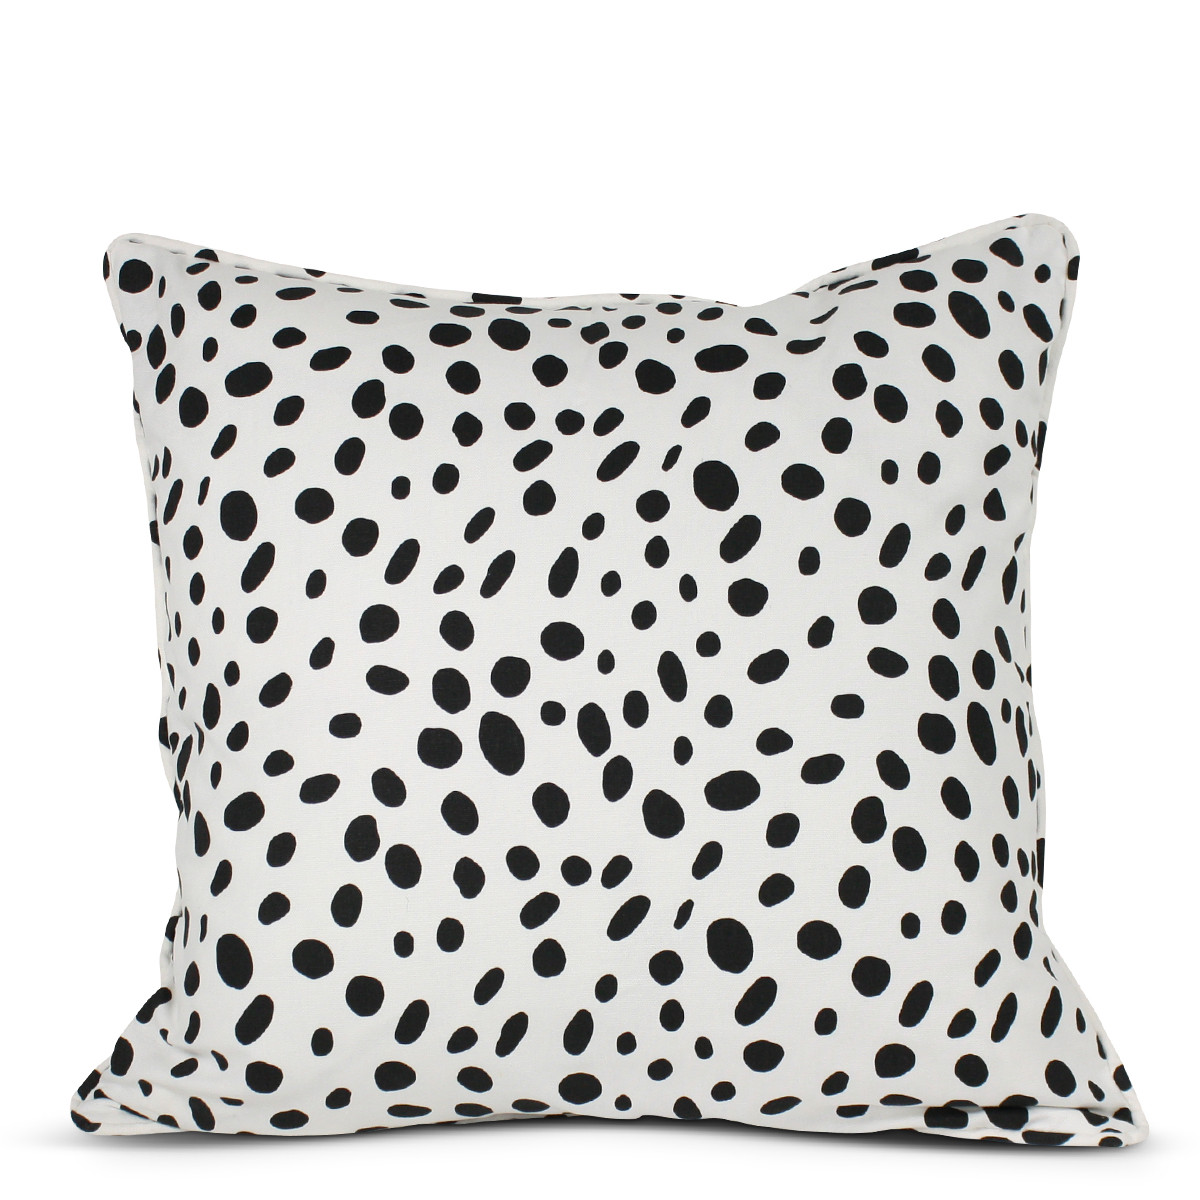 Black and White Spotted Pillow from Furbish Studio